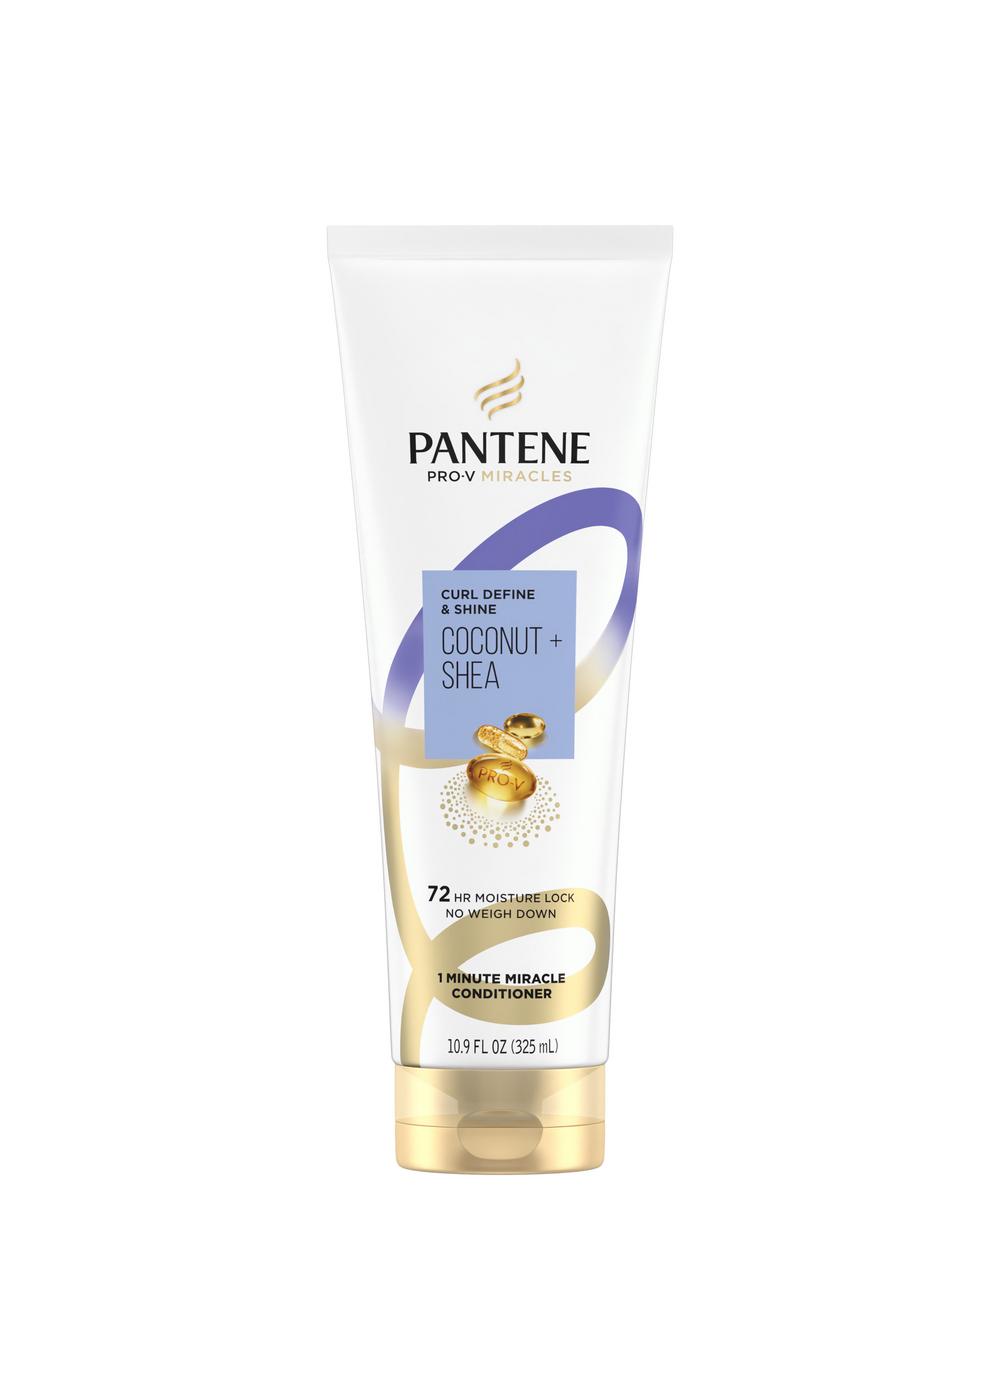 Pantene Curl Define & Shine Coconut + Shea Miracle Conditioner; image 1 of 2